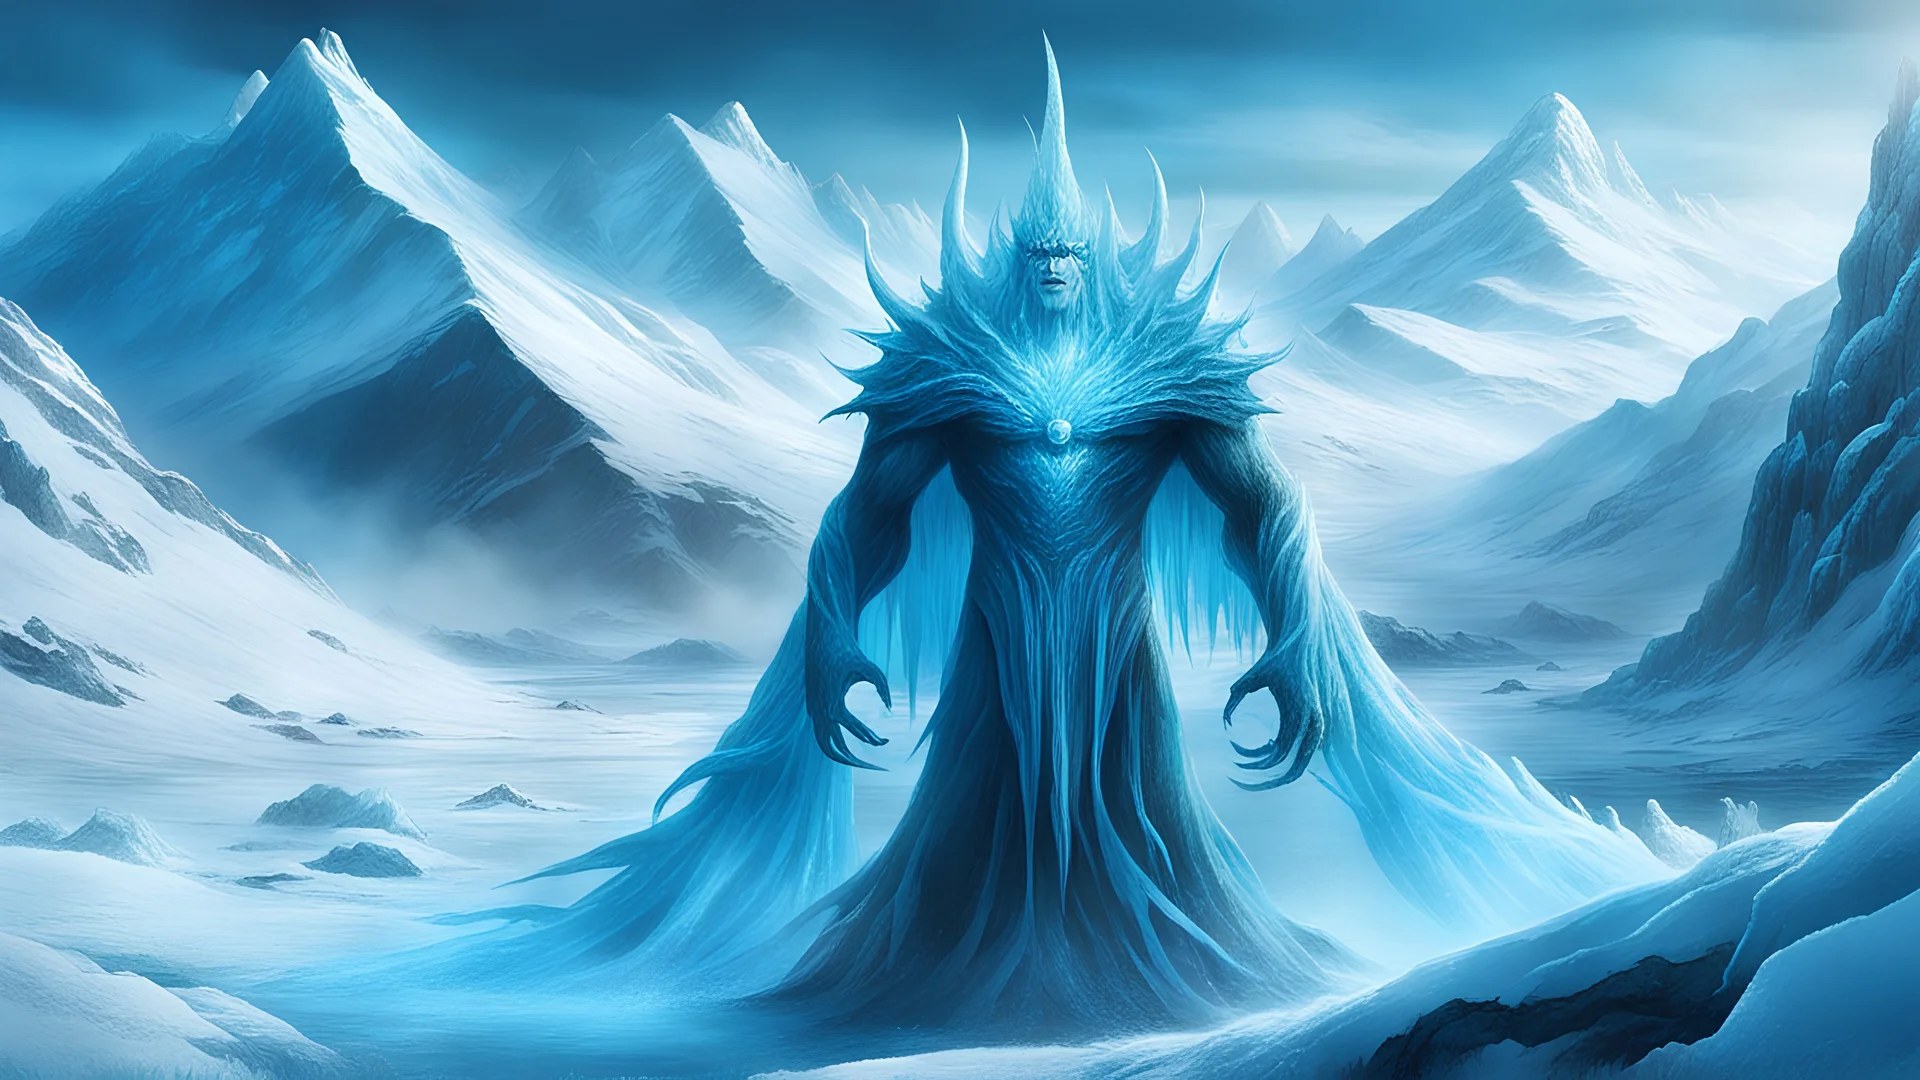 An inhuman monstrous fearsome ice wraith, evil spirit, bright blue eyes, a shimmer of blue magic; frozen landscape, glacier in the background